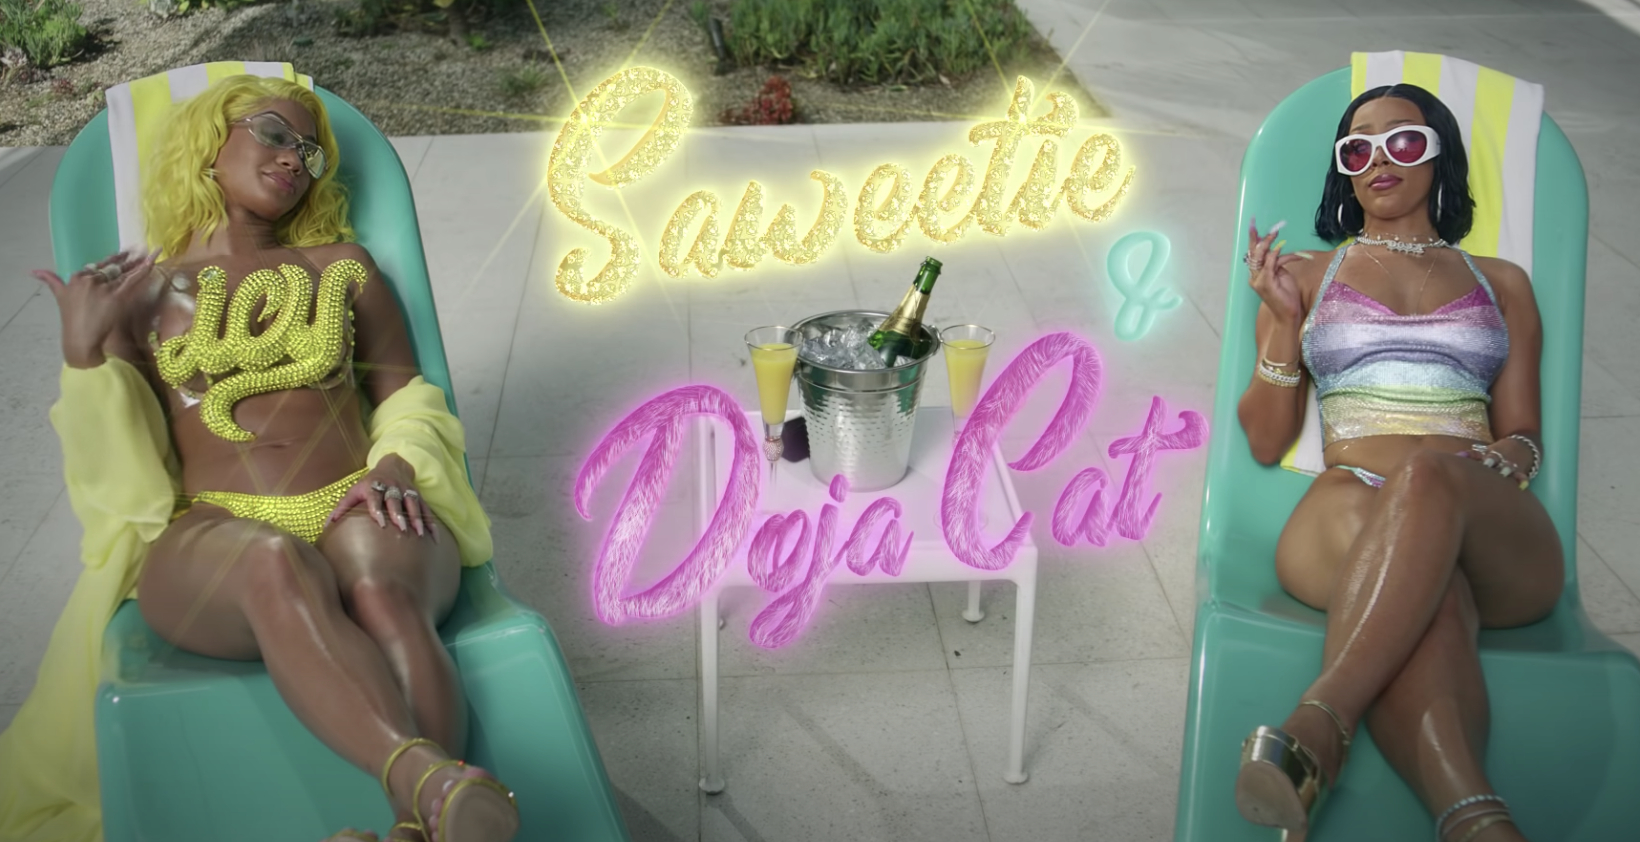 Saweetie and Doja Cat lounging on seats by the pool with Saweetie rocking a top that says ICY